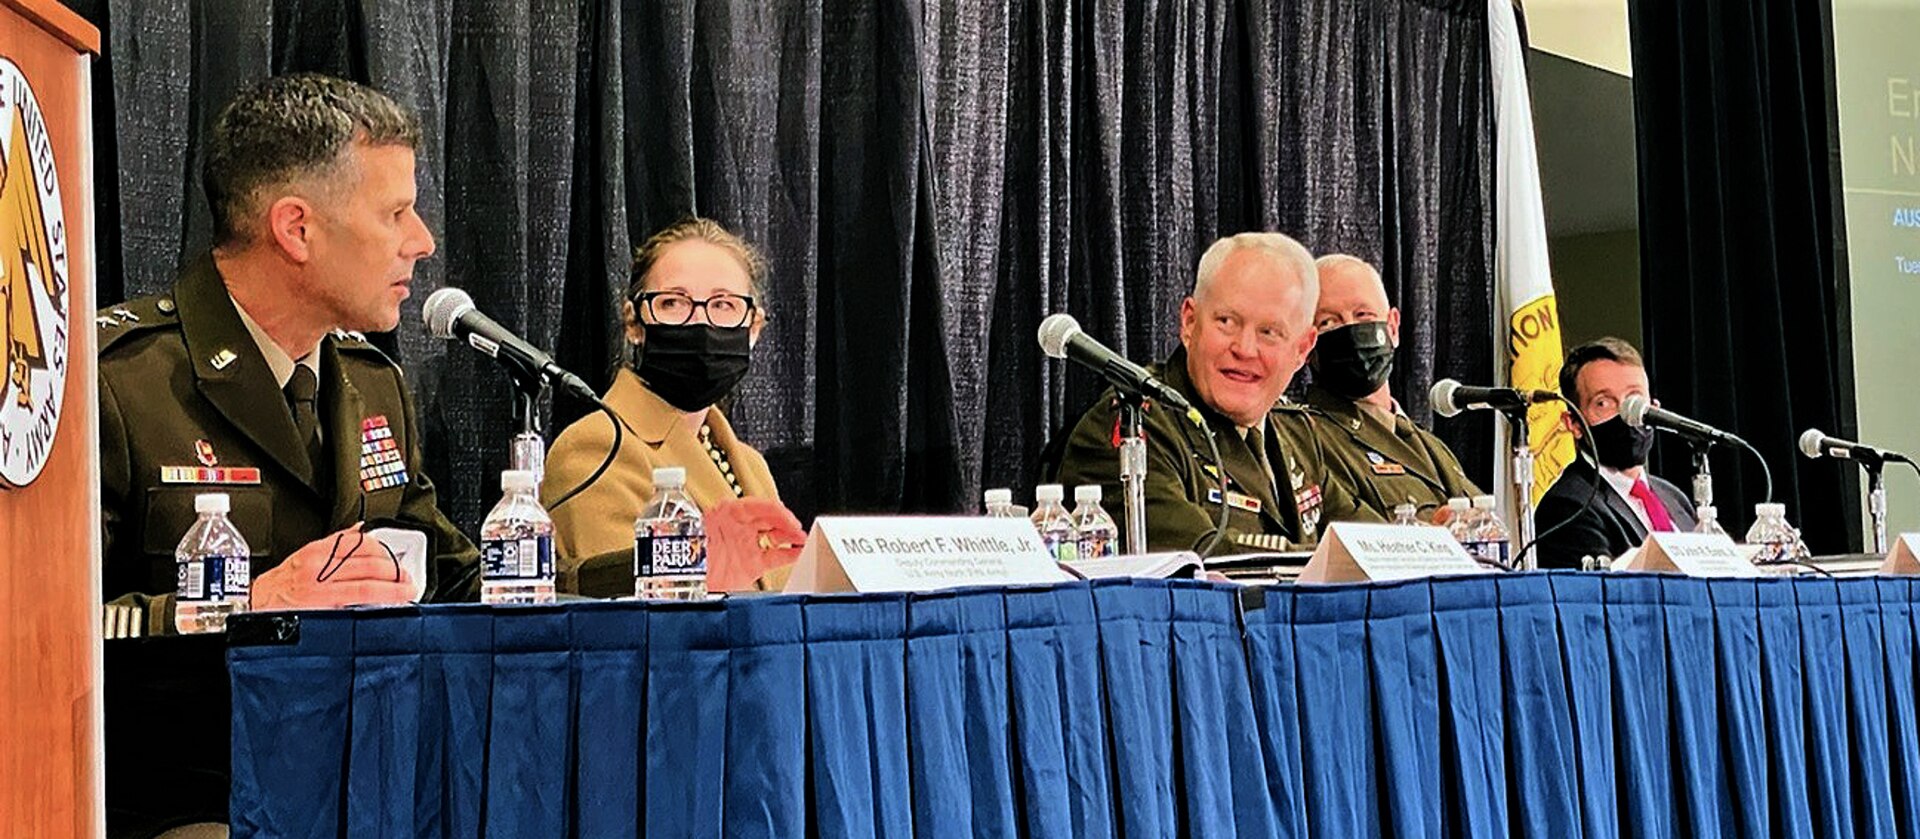 Enhancing National Resiliency panel during this year’s Association of the United States Army meeting